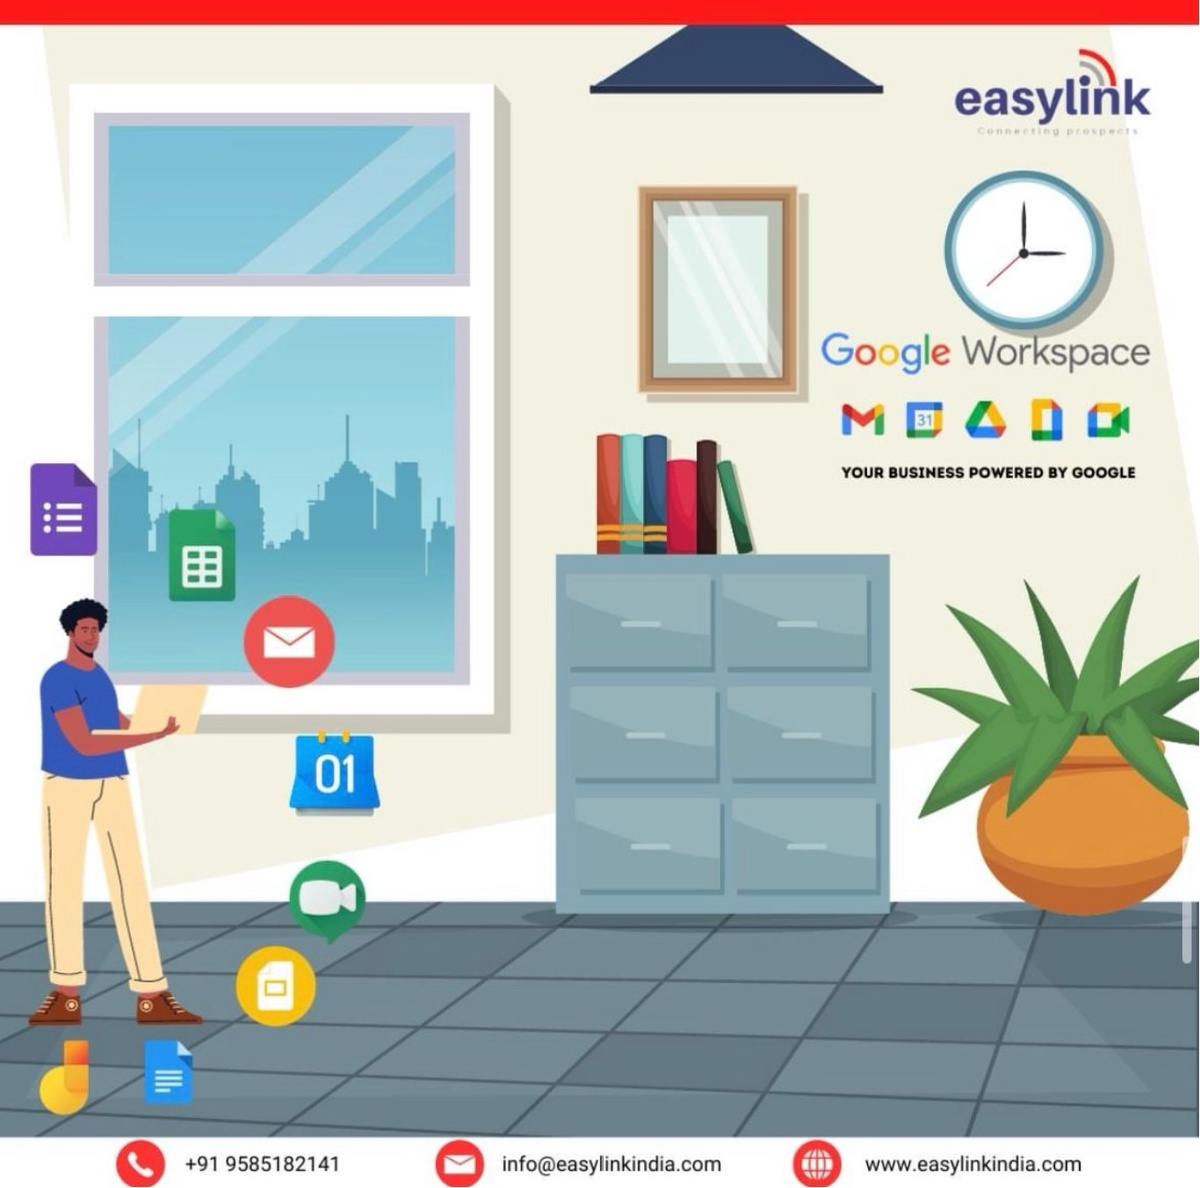 Secure, Seamless, Productive: Experience Google Workspace with EasyLink